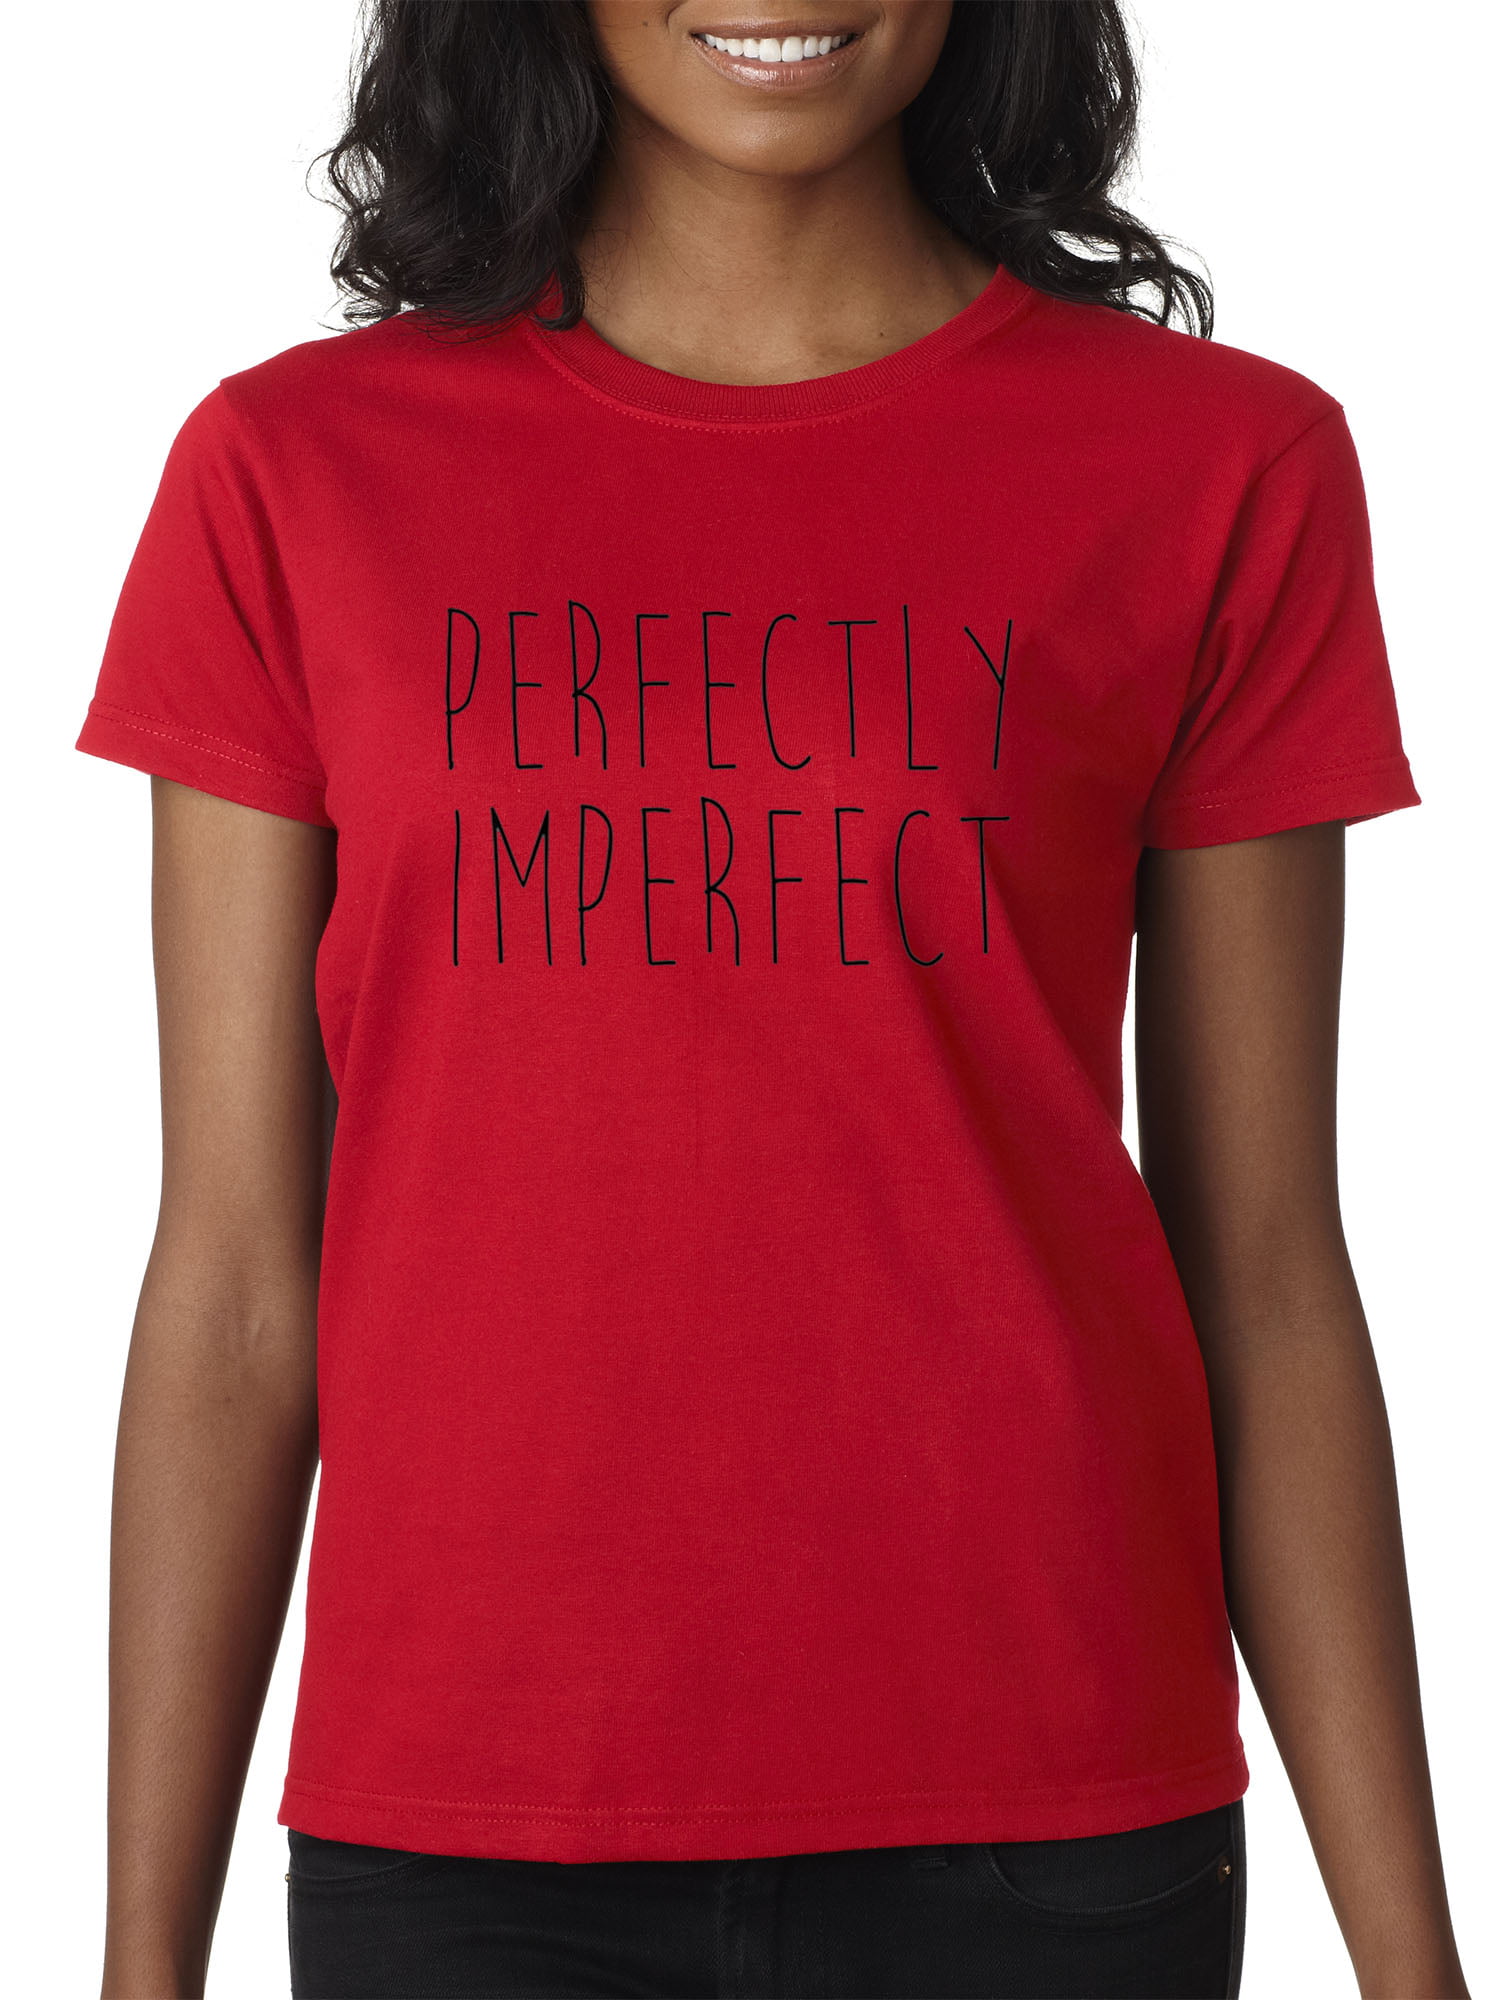 Perfectly Funny Imperfect Retro UniSex Gift Novelty Blouse Ladie/'s T-Shirt Top